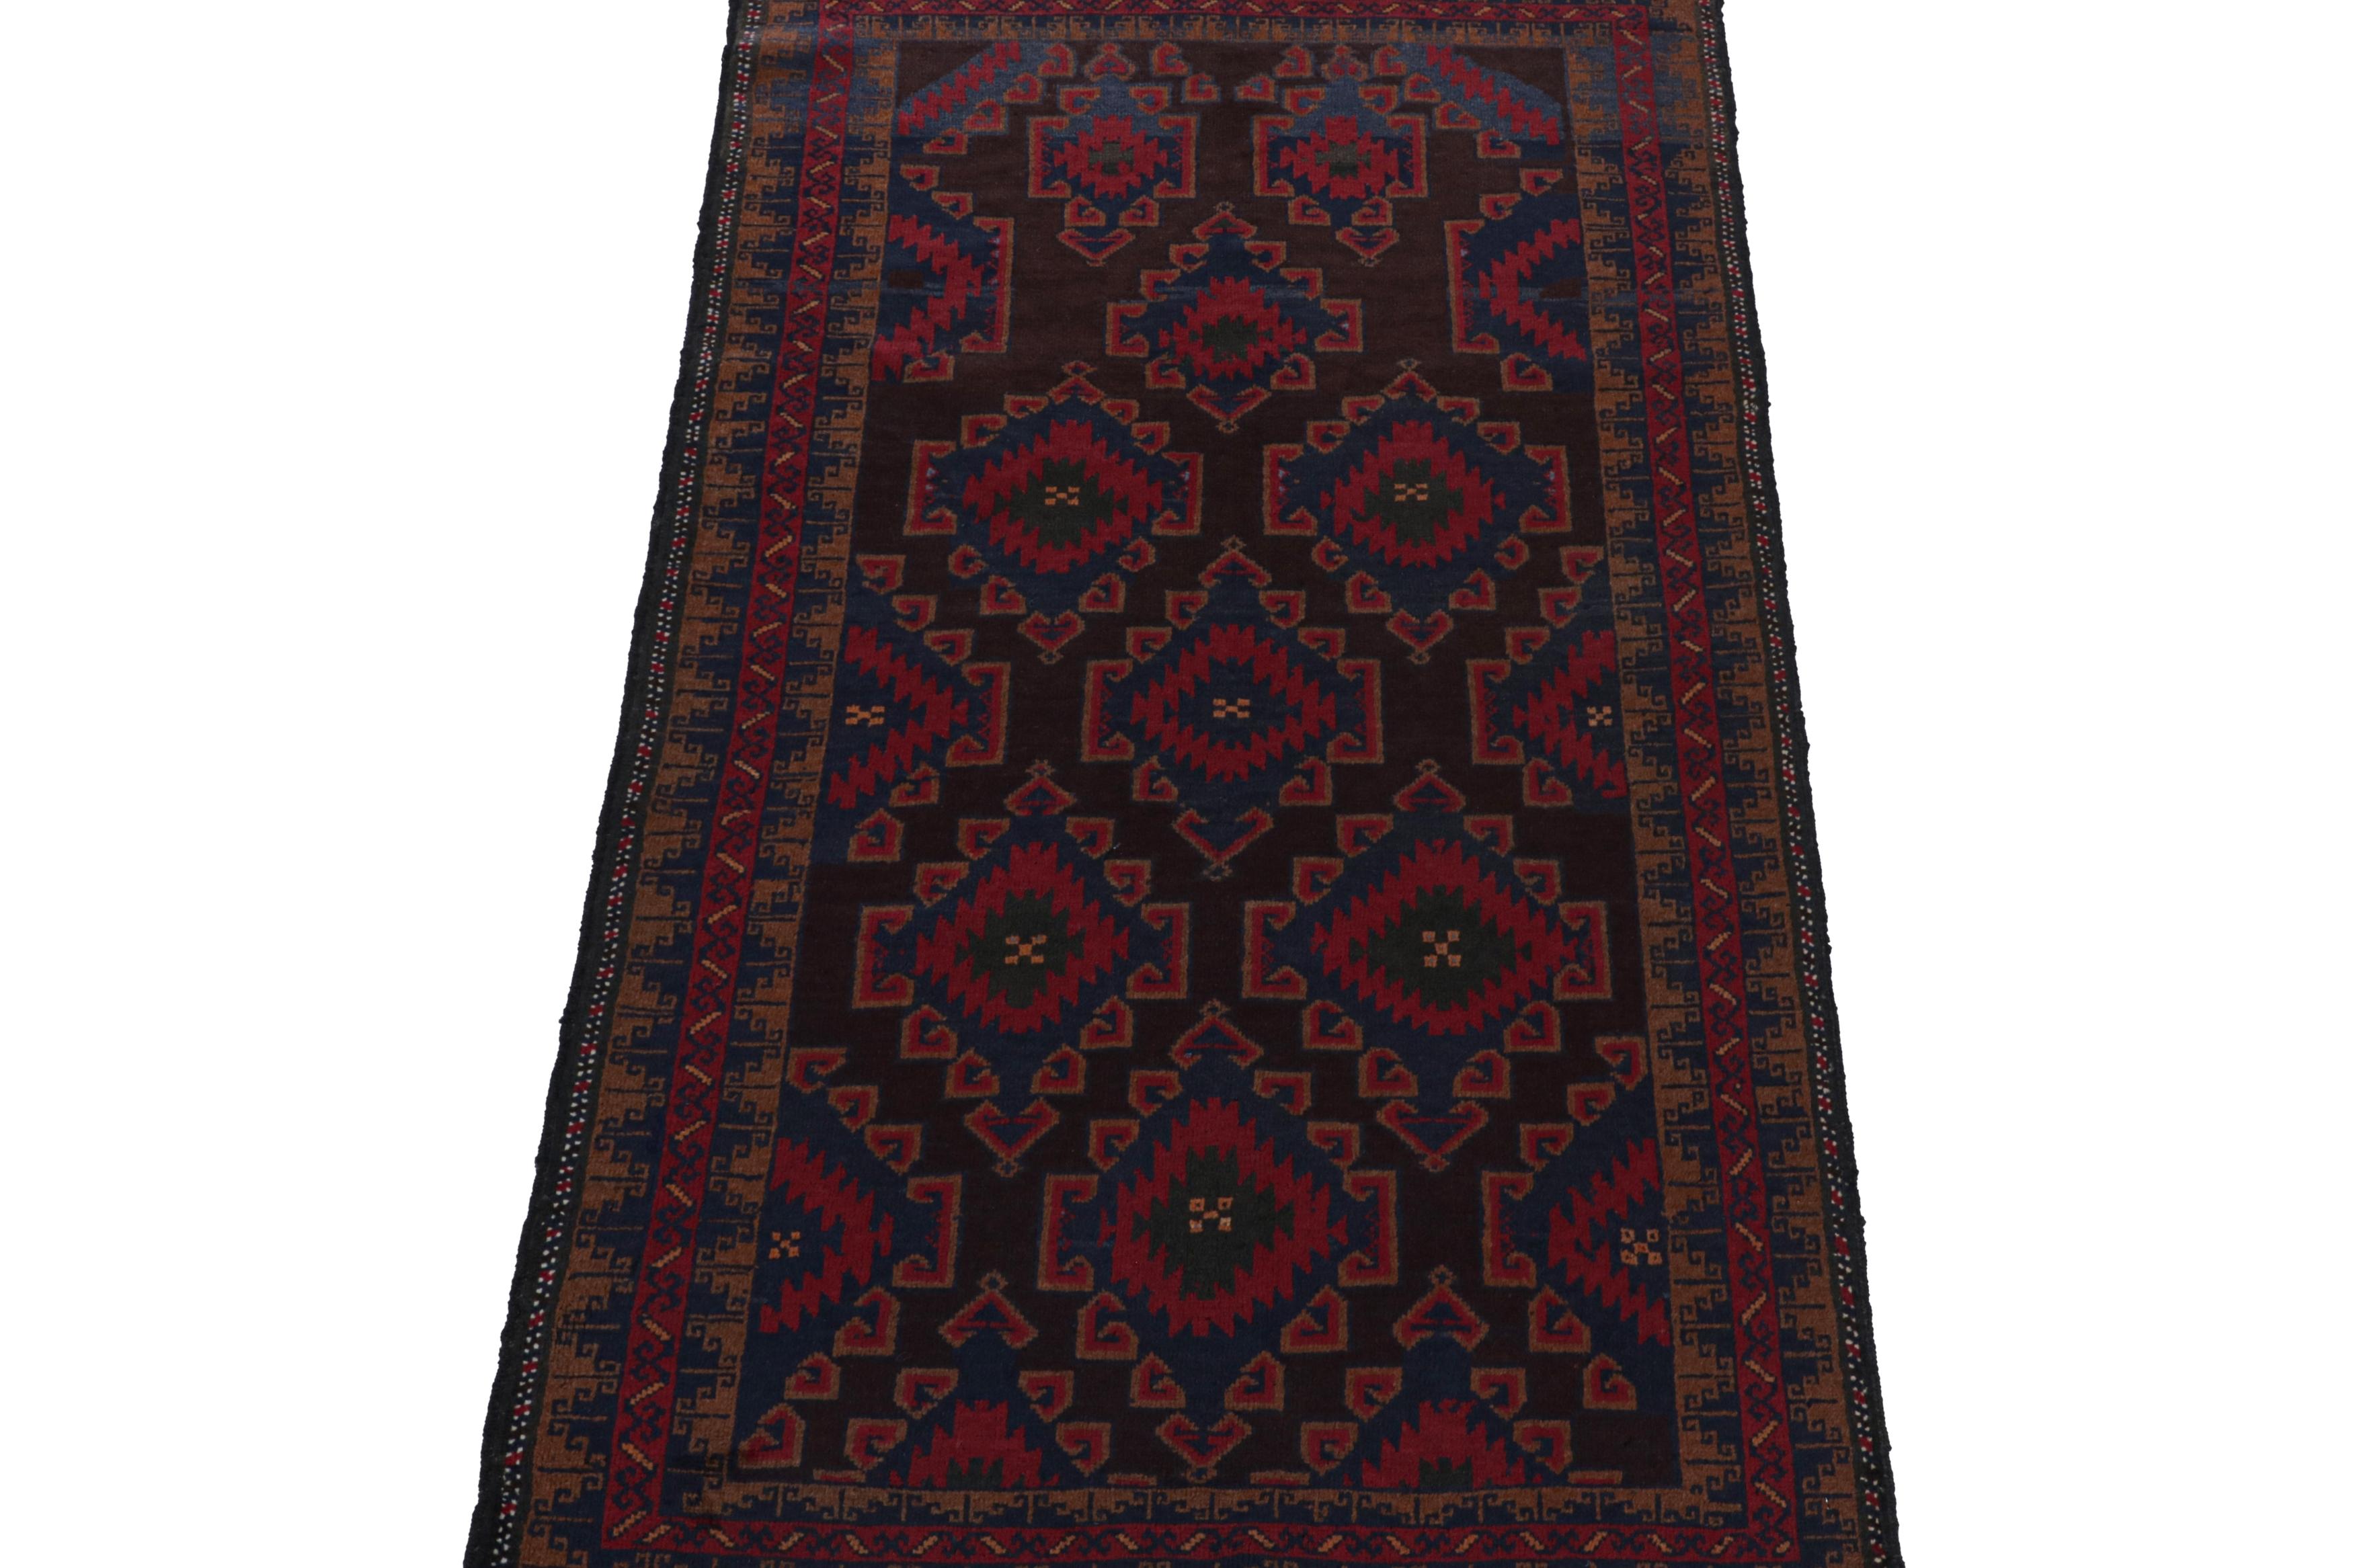 Hand-knotted in wool, this 3x6 Baluch Persian runner of the 1950s is the latest to enter Rug & Kilim’s Antique & Vintage collection.

On the Design:

The piece carries tribal patterns in rich tones of red & blue on black. The field is encased in